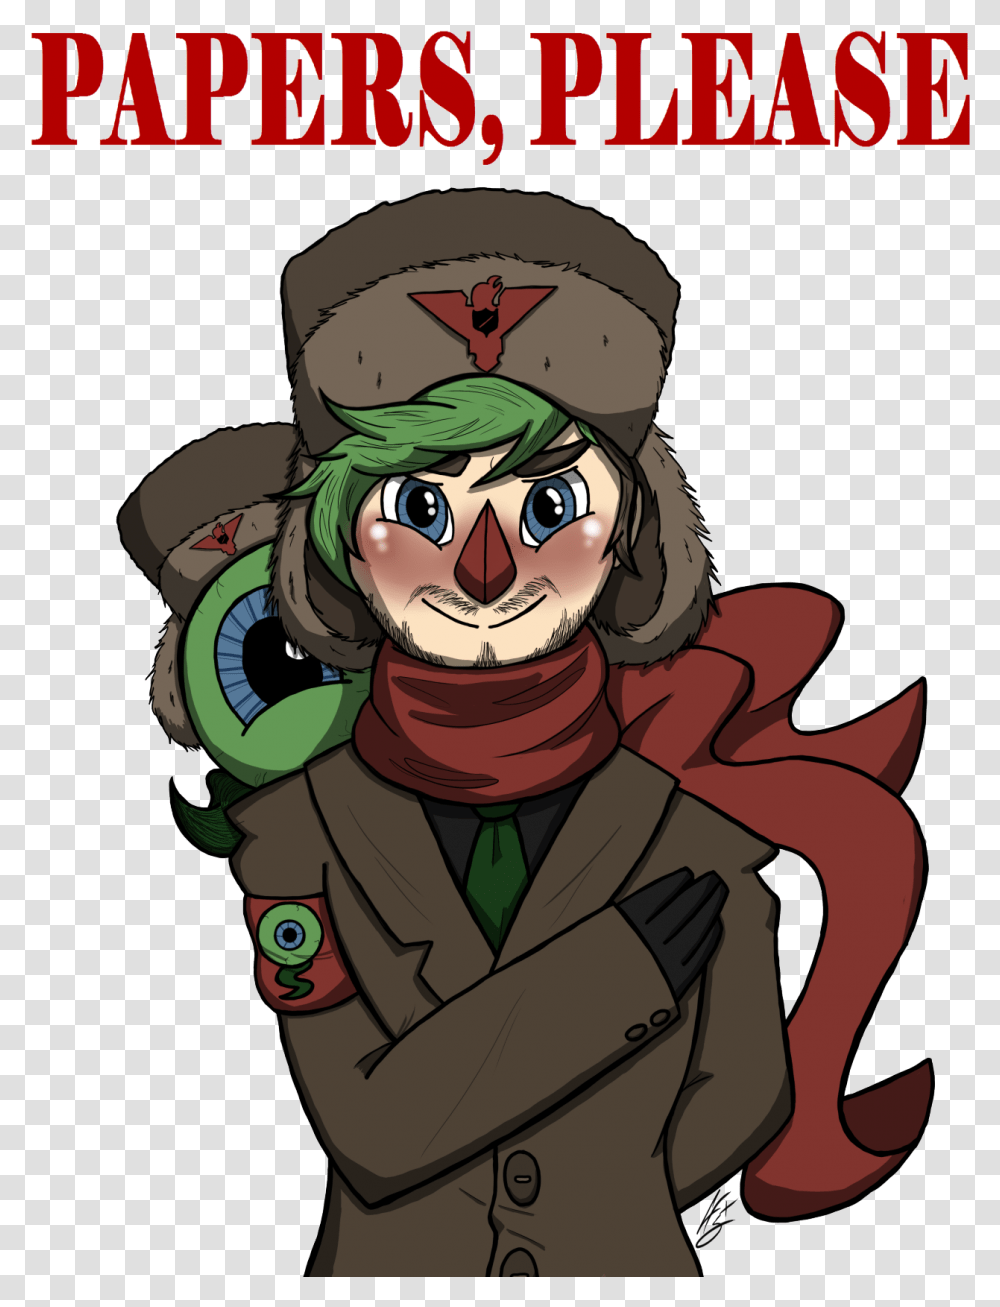 Jacksepticeye Papers Please Fanart, Costume, Person, Elf, Poster Transparent Png